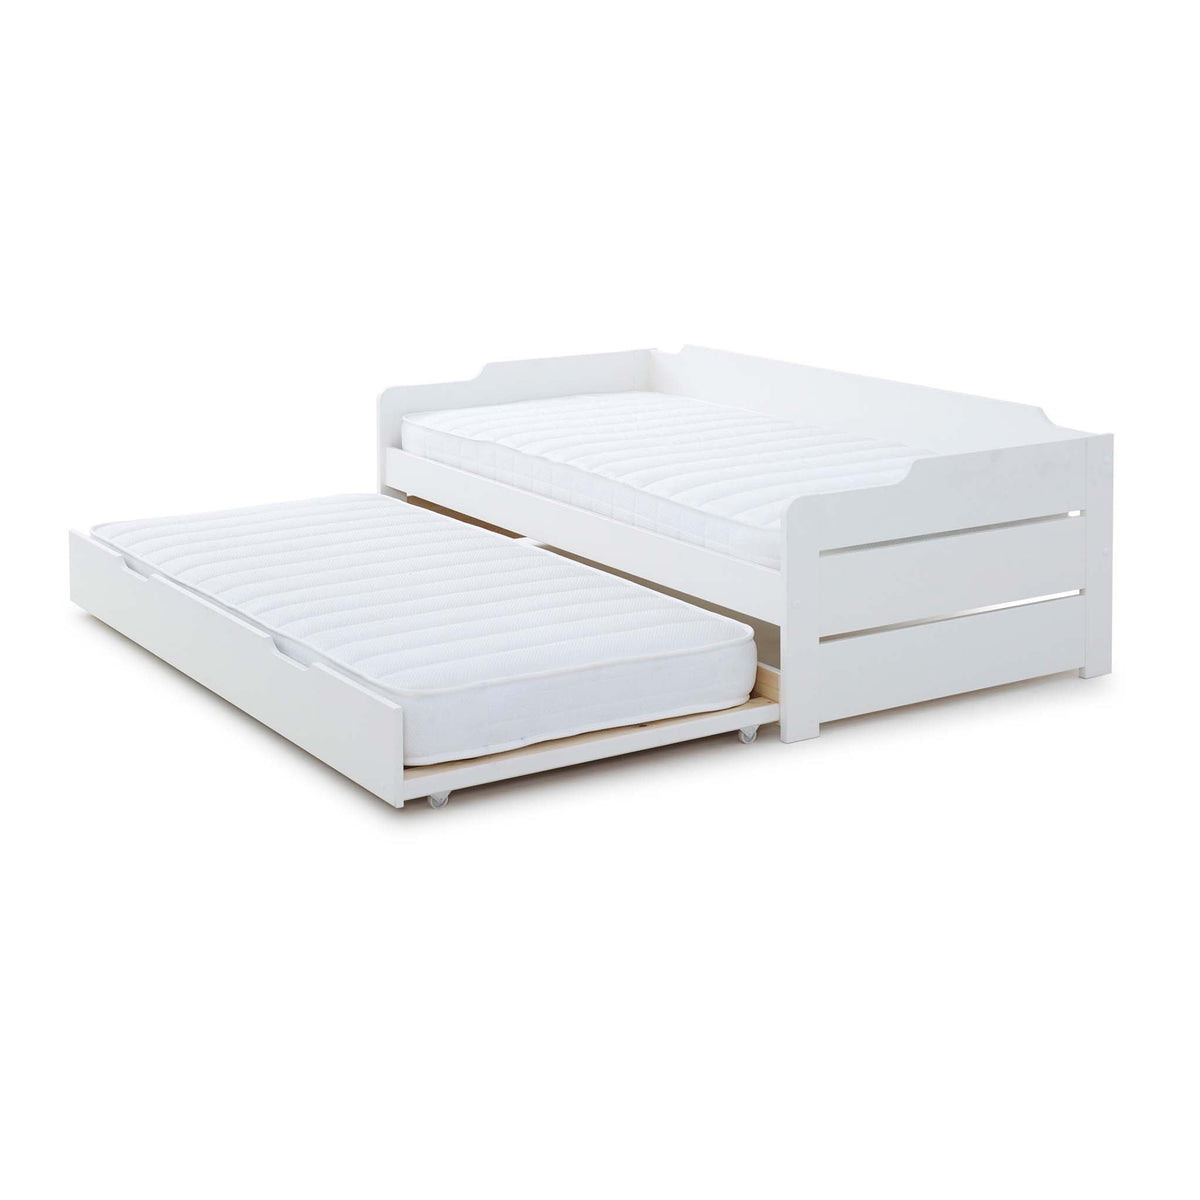 Snooze White Wooden Bed with Trundle by Roseland Furniture